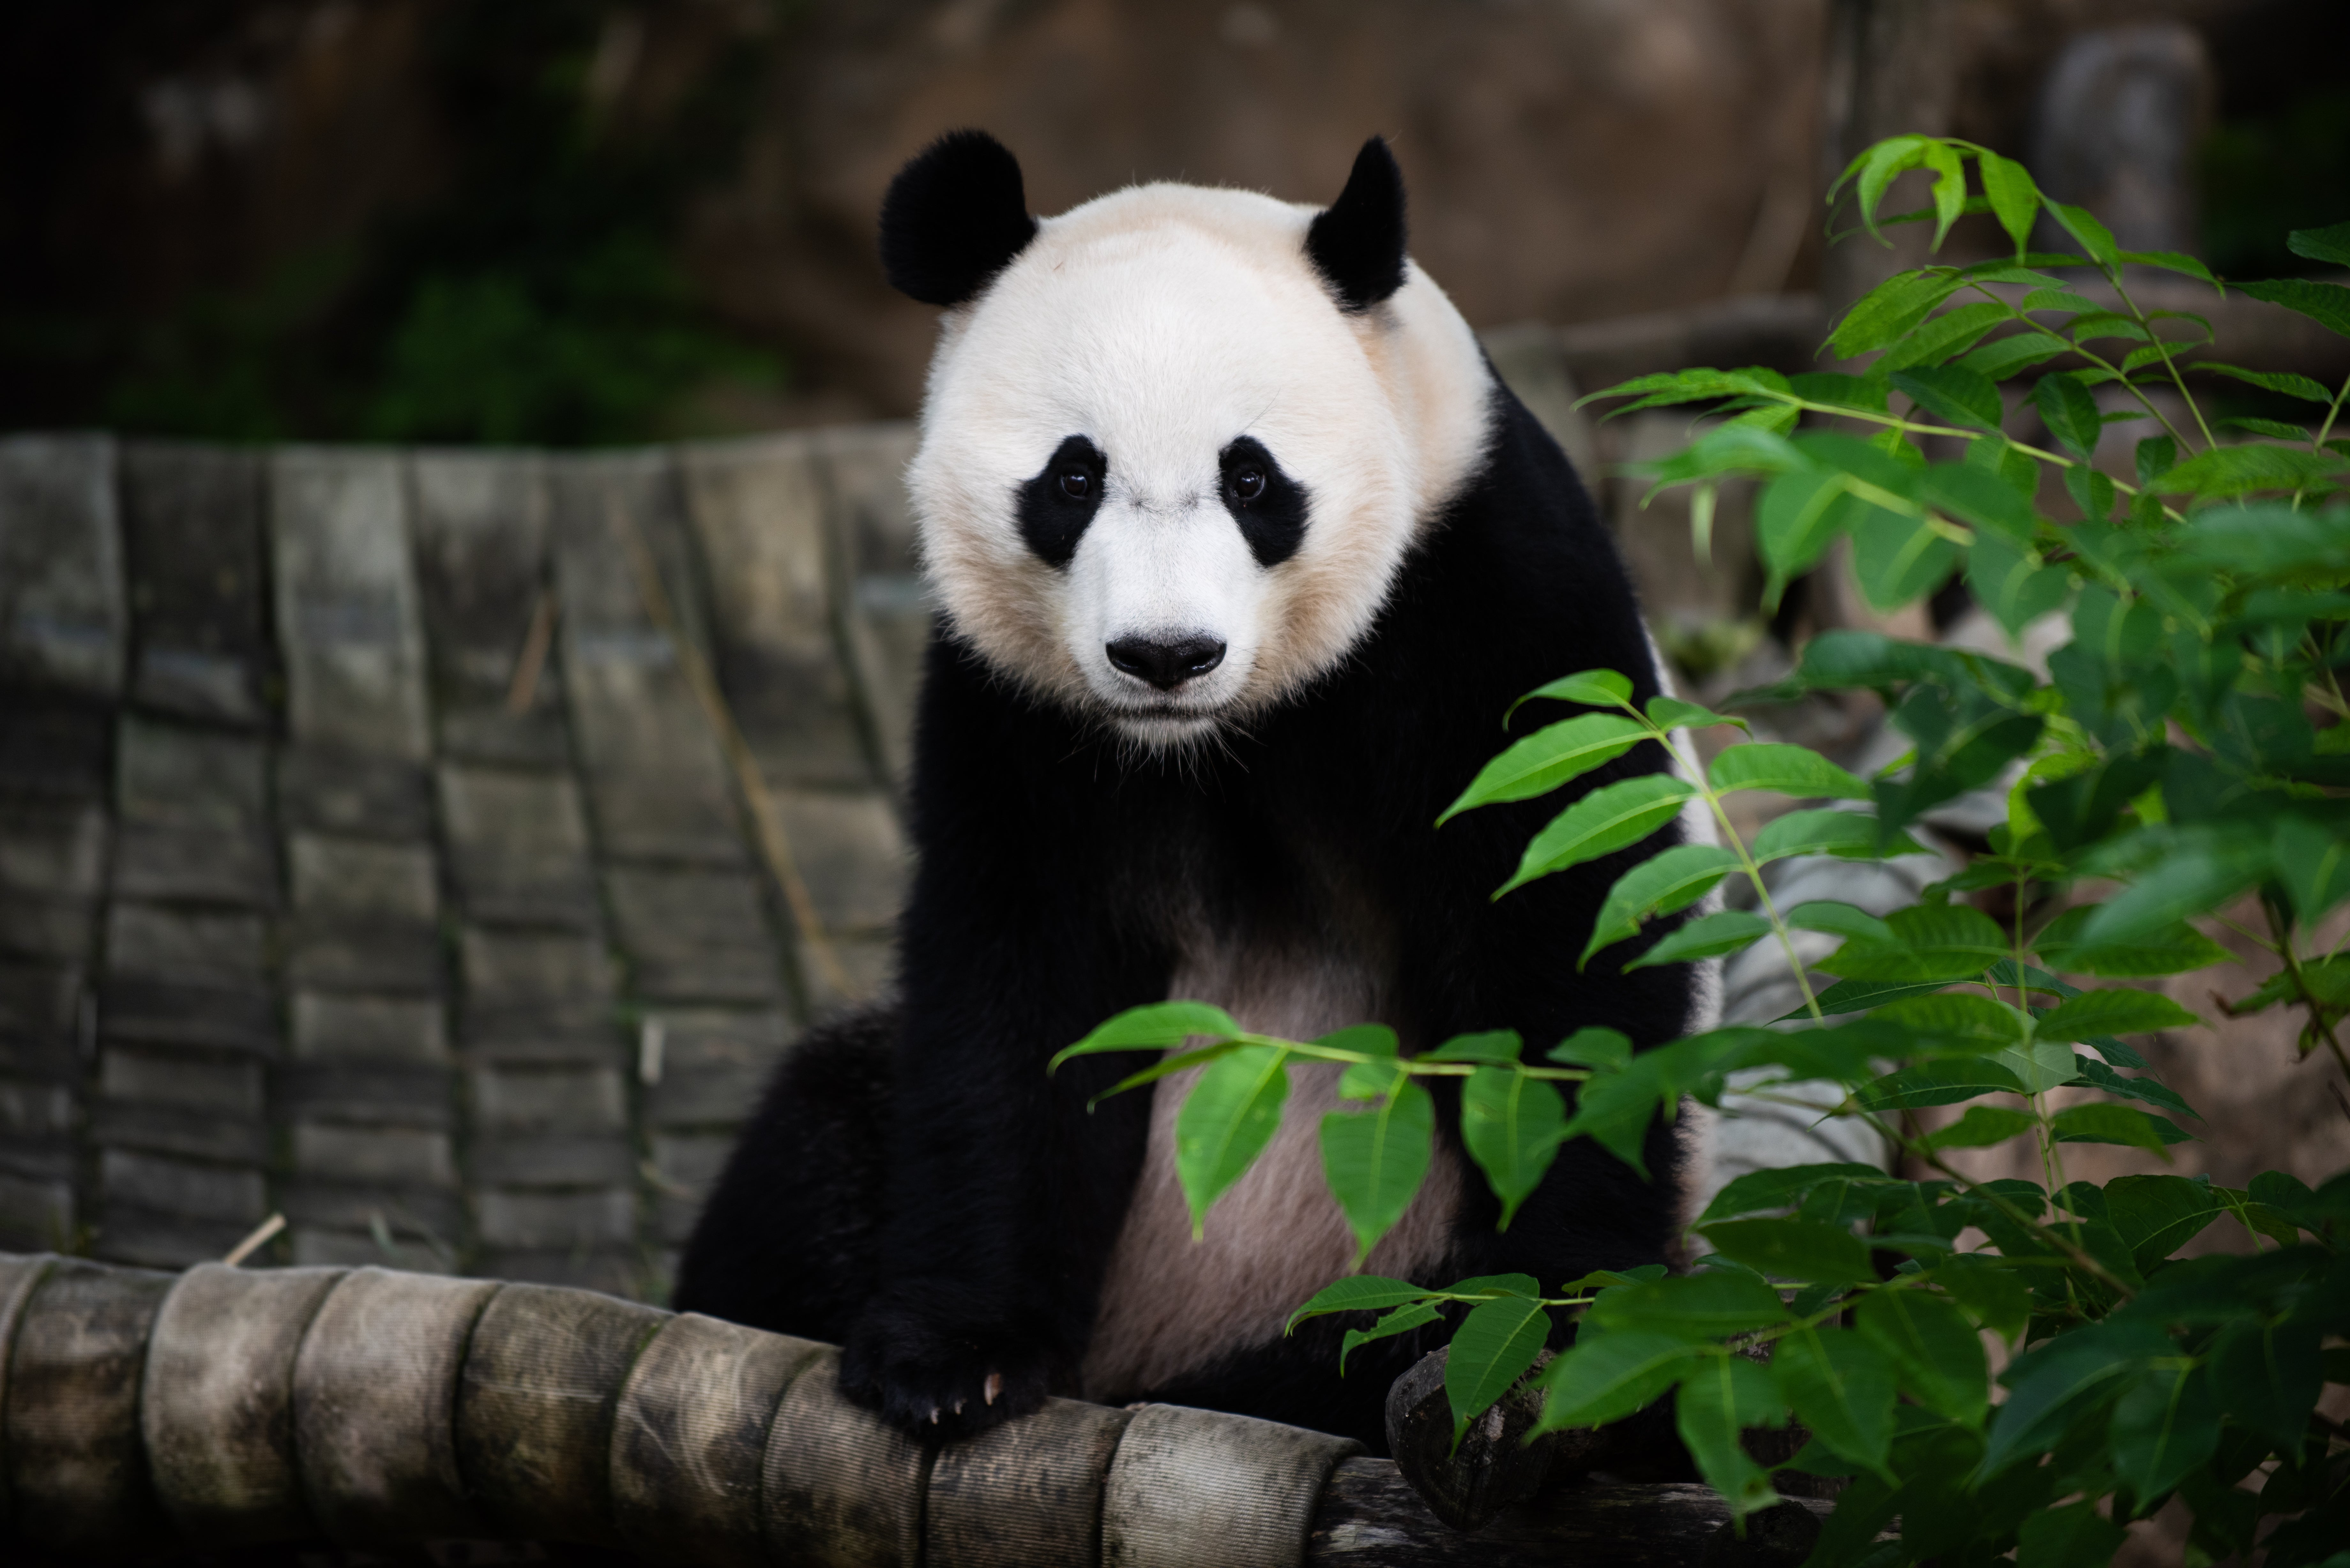 Giant panda Bei Bei sits on a hammock in his outdoor enclosure.